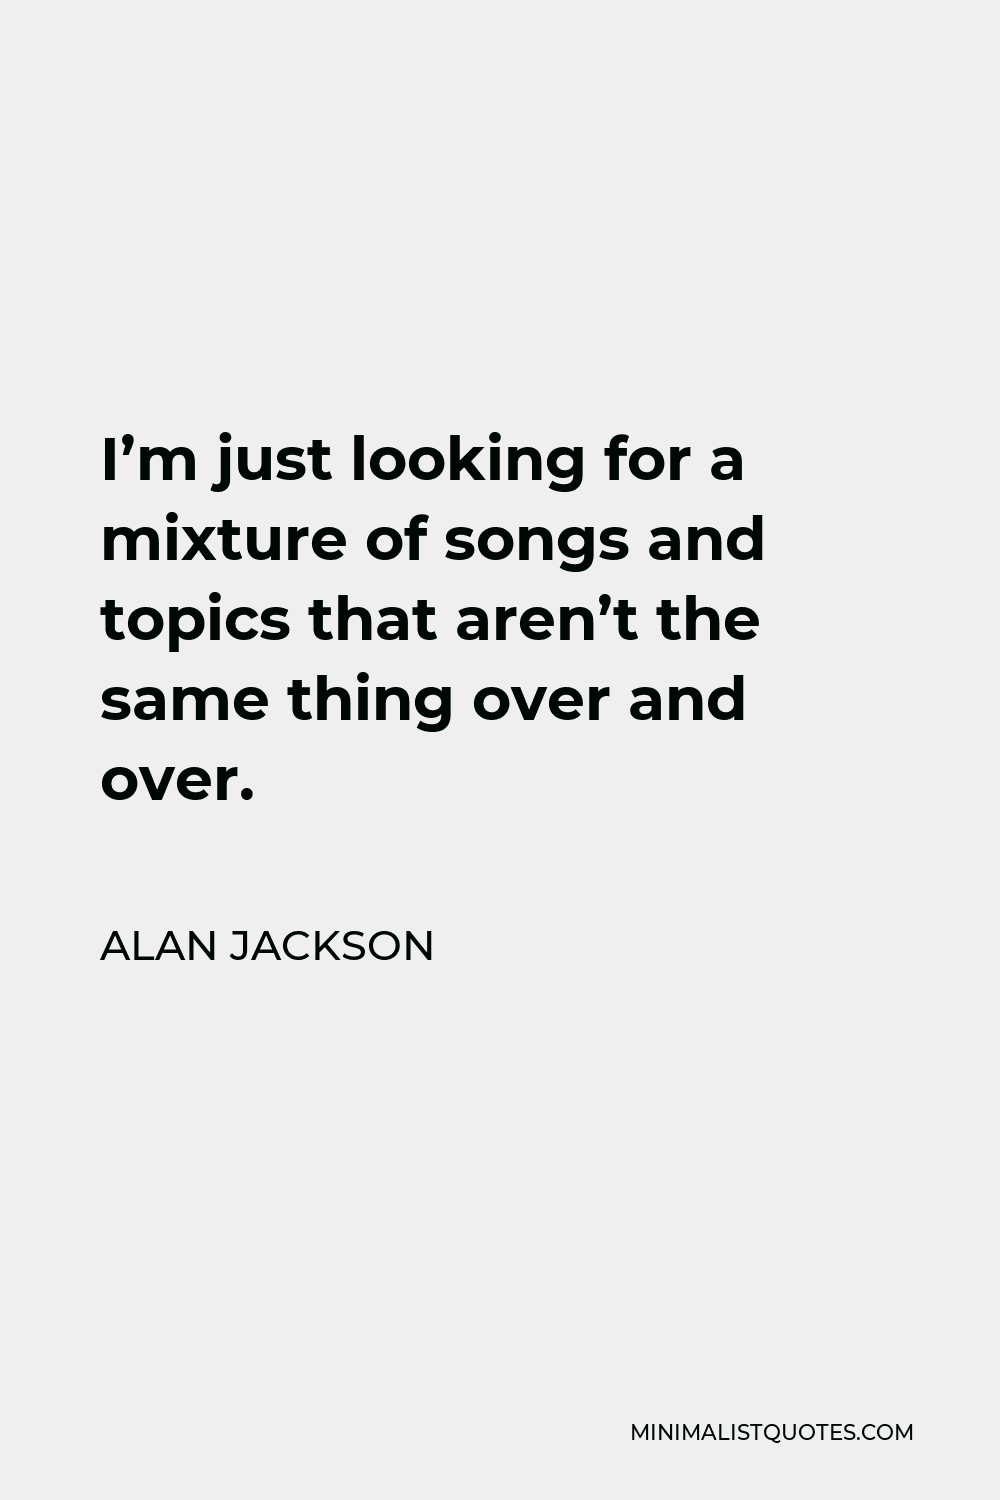 Alan Jackson Quote - I’m just looking for a mixture of songs and topics that aren’t the same thing over and over.